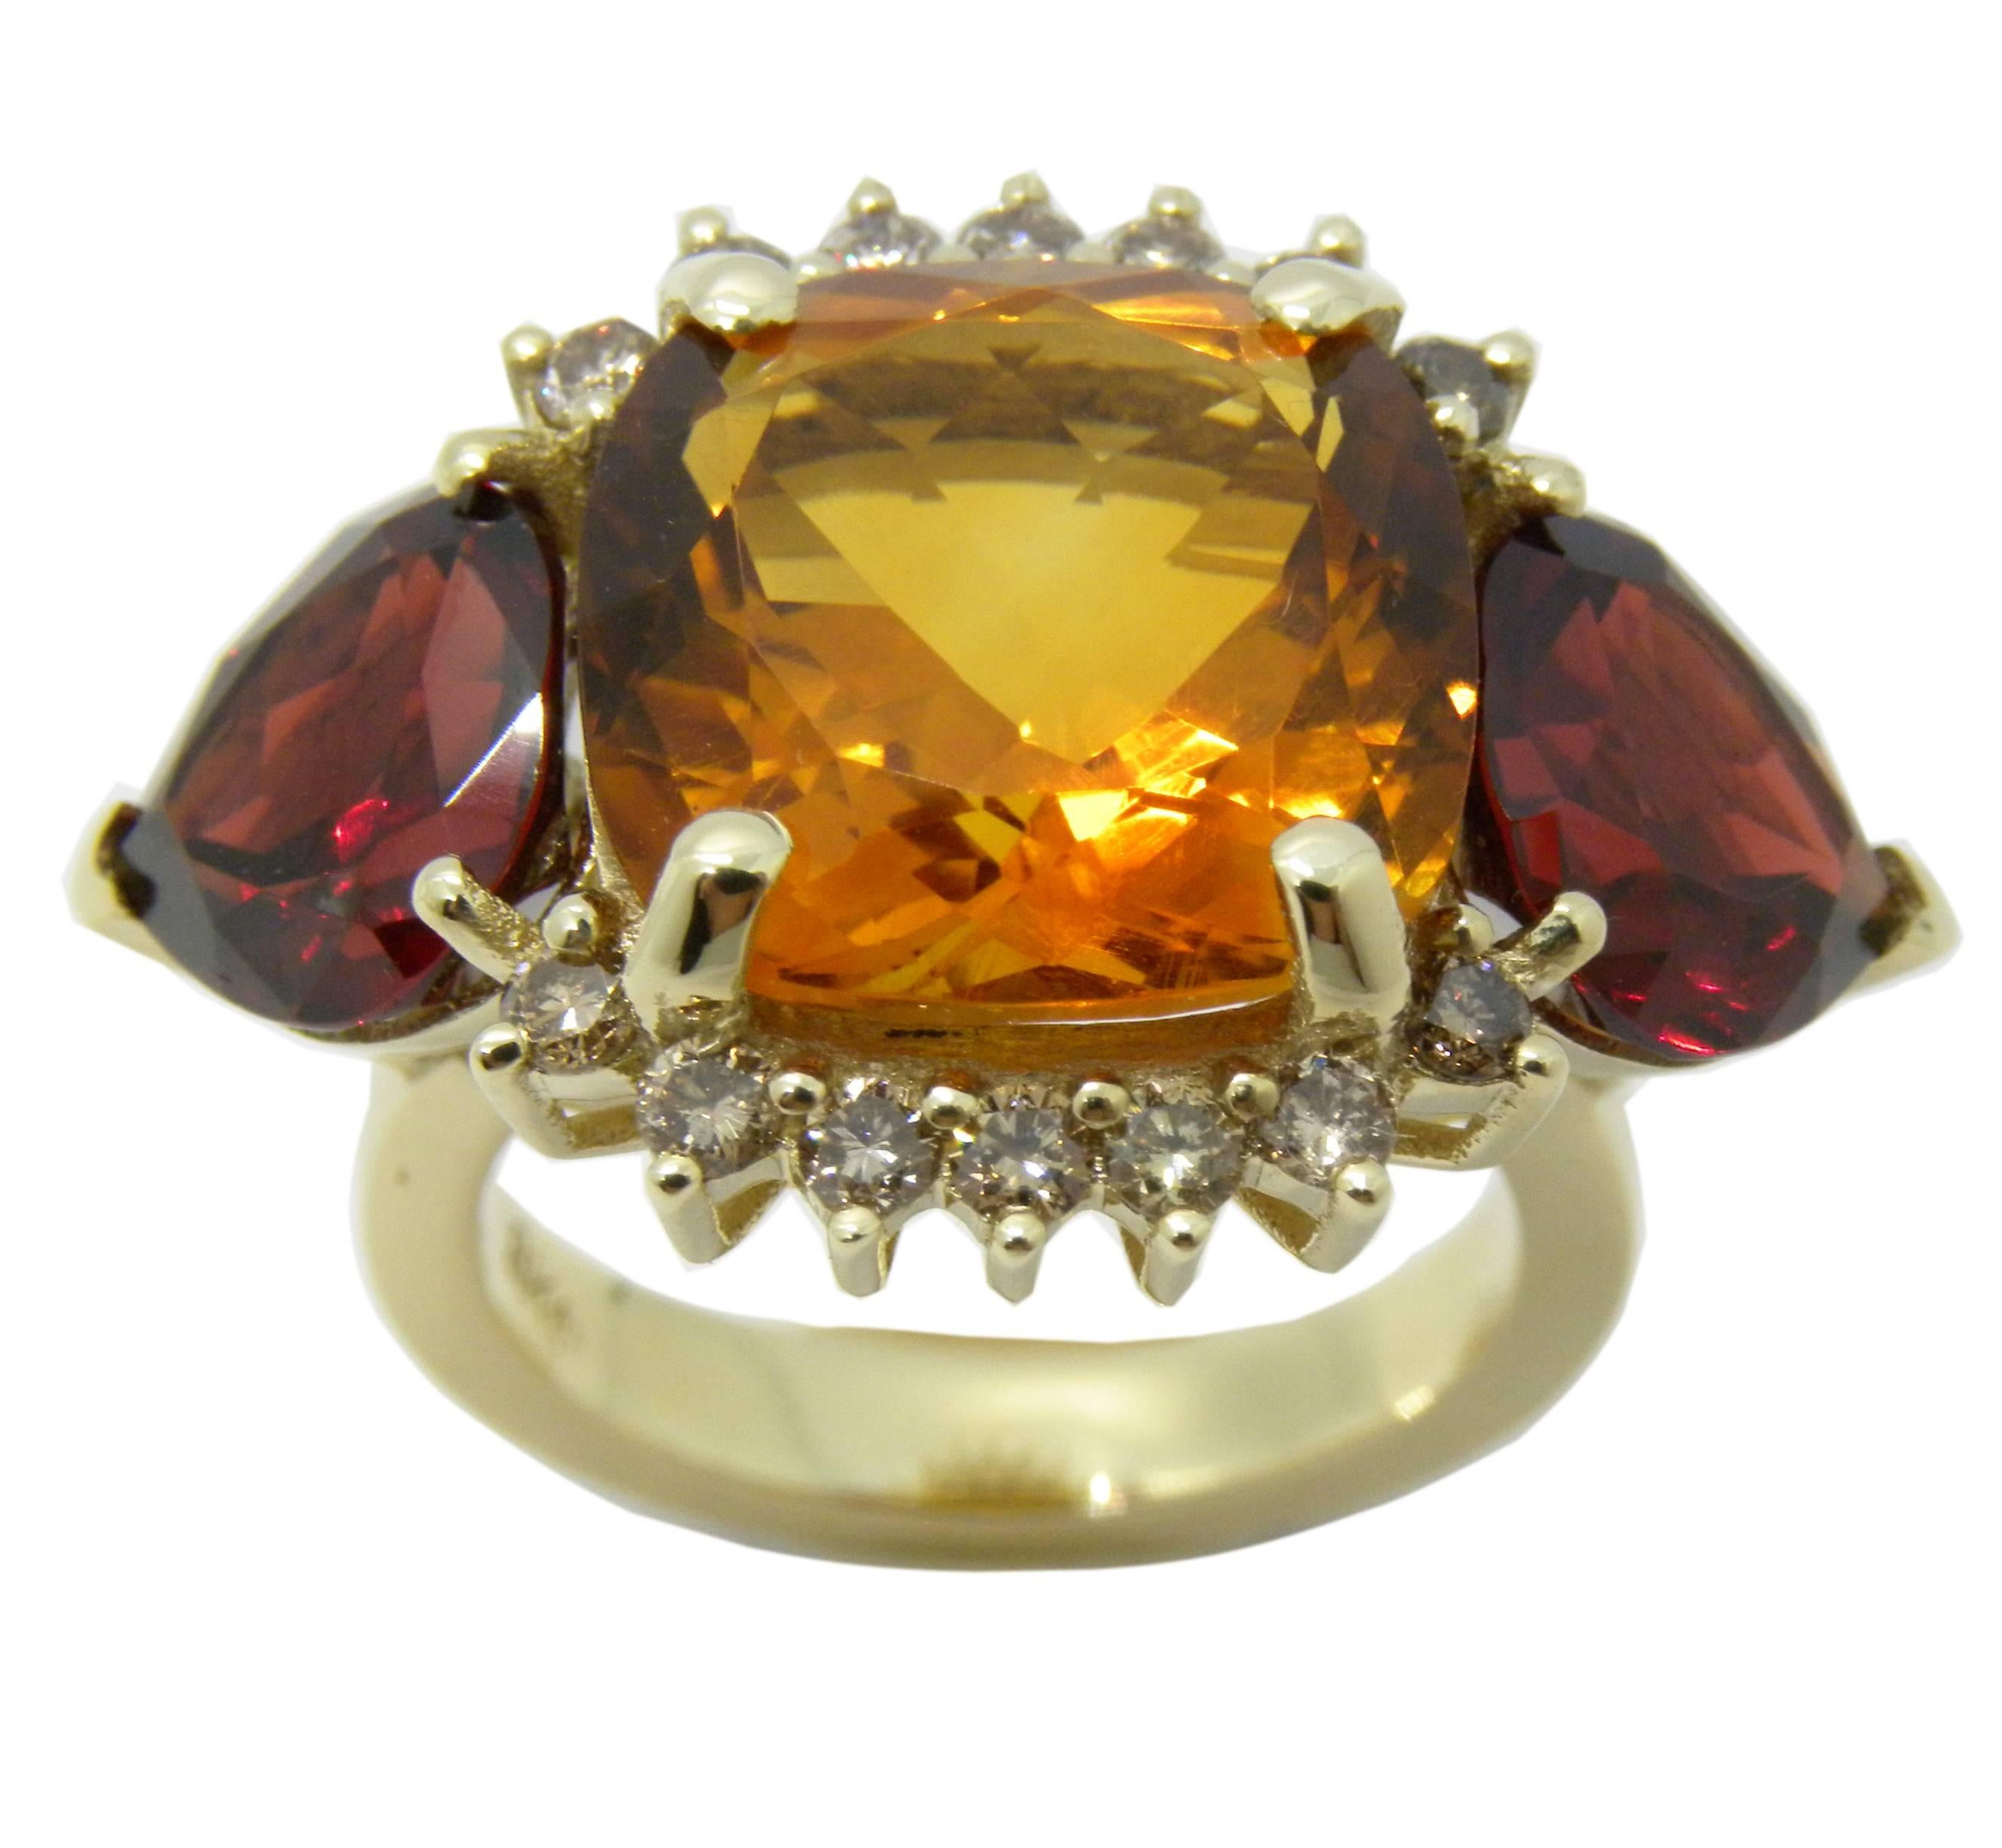 Fabulous, One-of-a-kind, Unique yet Timeless Cocktail Ring featuring an 8.43 Carat Antik Cut Madeira Quartz, 6.47 Carat Pear Cut Vivid Red Spessartite surrounded by 0.57 Carat Champagne Diamond, 0.35 OzT, 9Carat Yellow Gold setting.
Antik Cut size